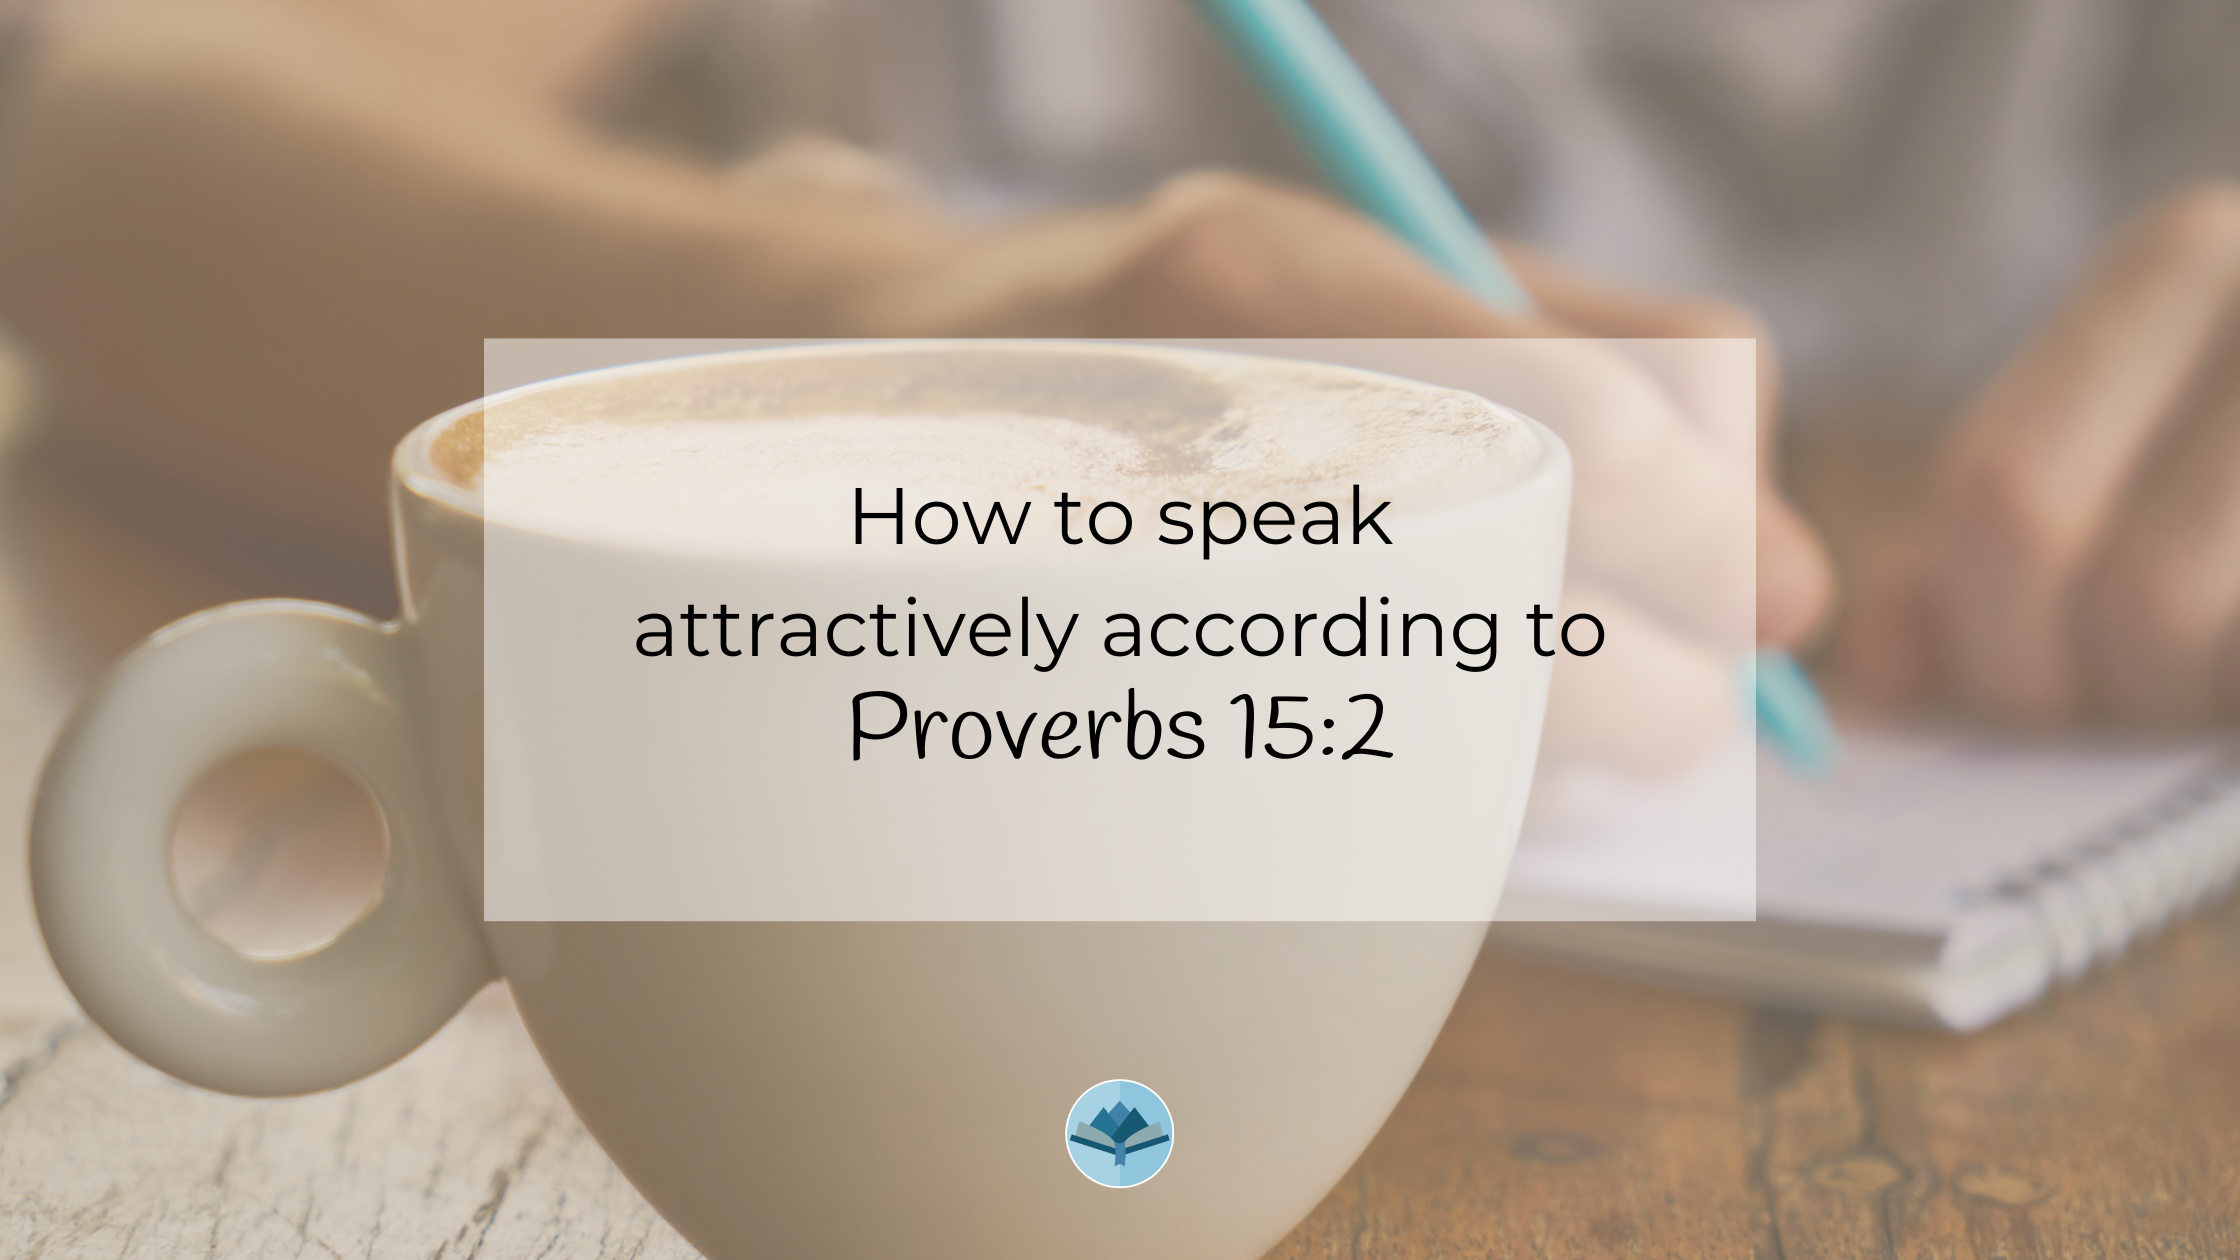 How to speak attractively according to Proverbs 15:2